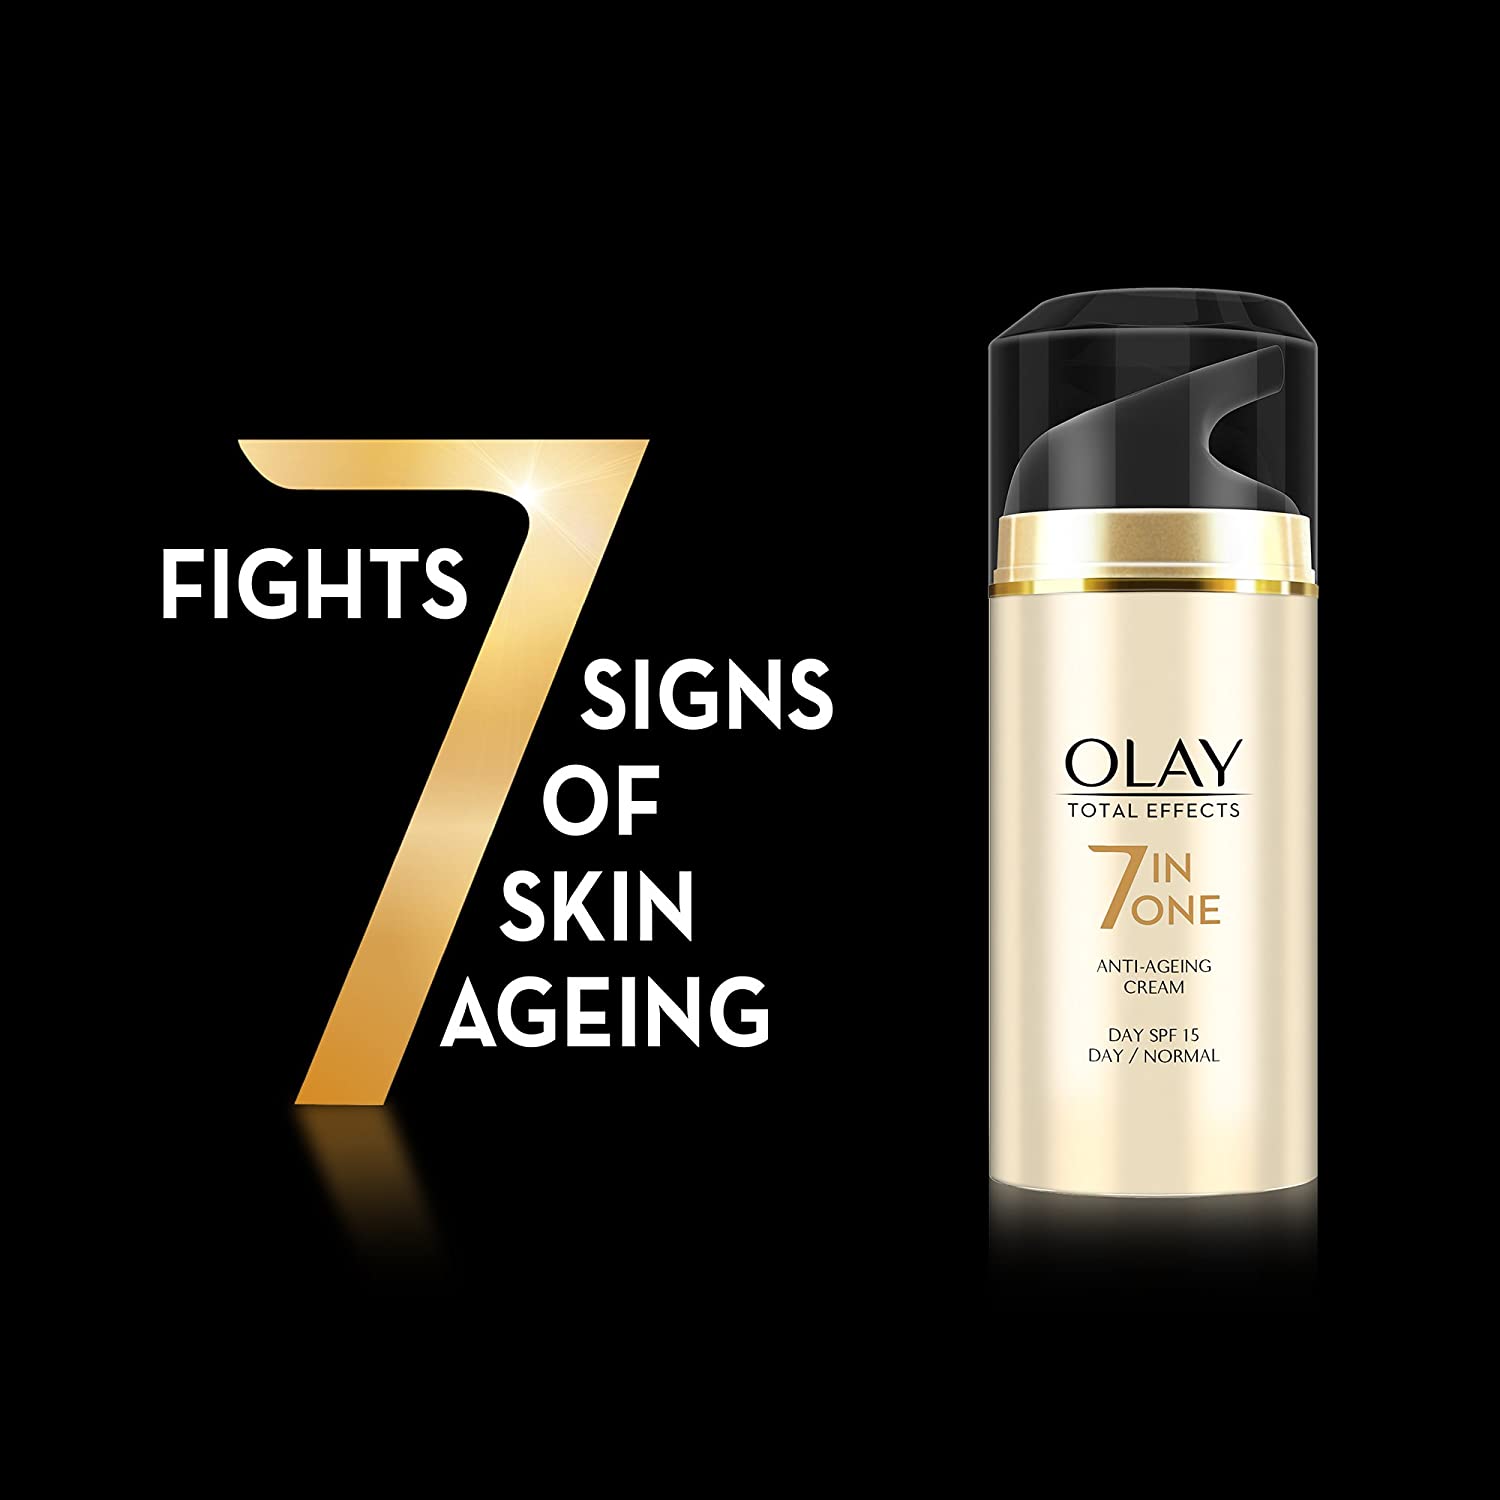 Olay Total Effects SPF 15 Anti-Ageing Cream, 20 gm, Pack of 1 